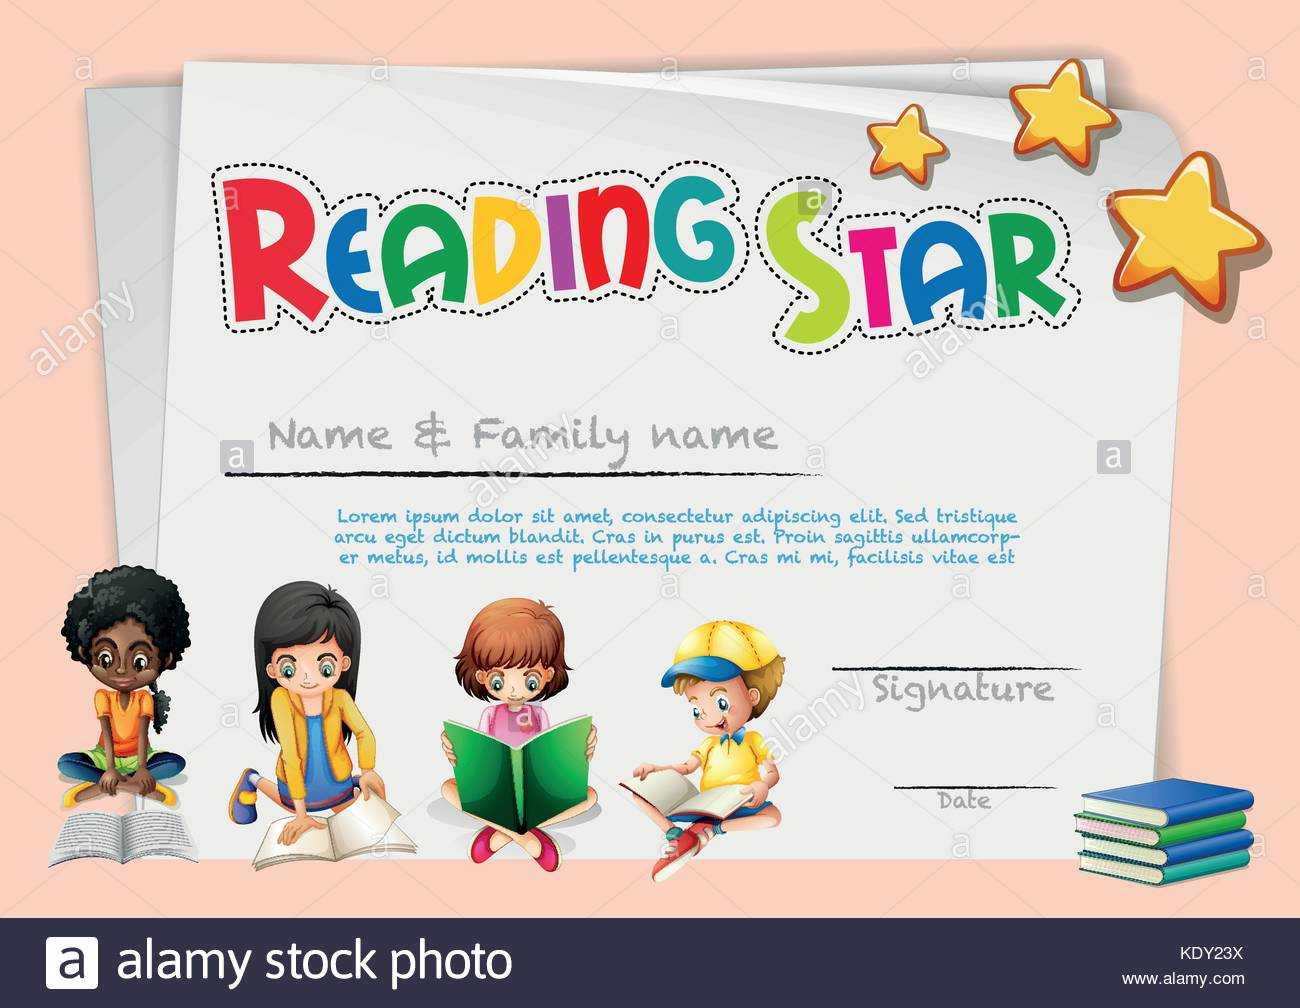 Certificate Template For Reading Star Illustration Stock In Star Naming Certificate Template